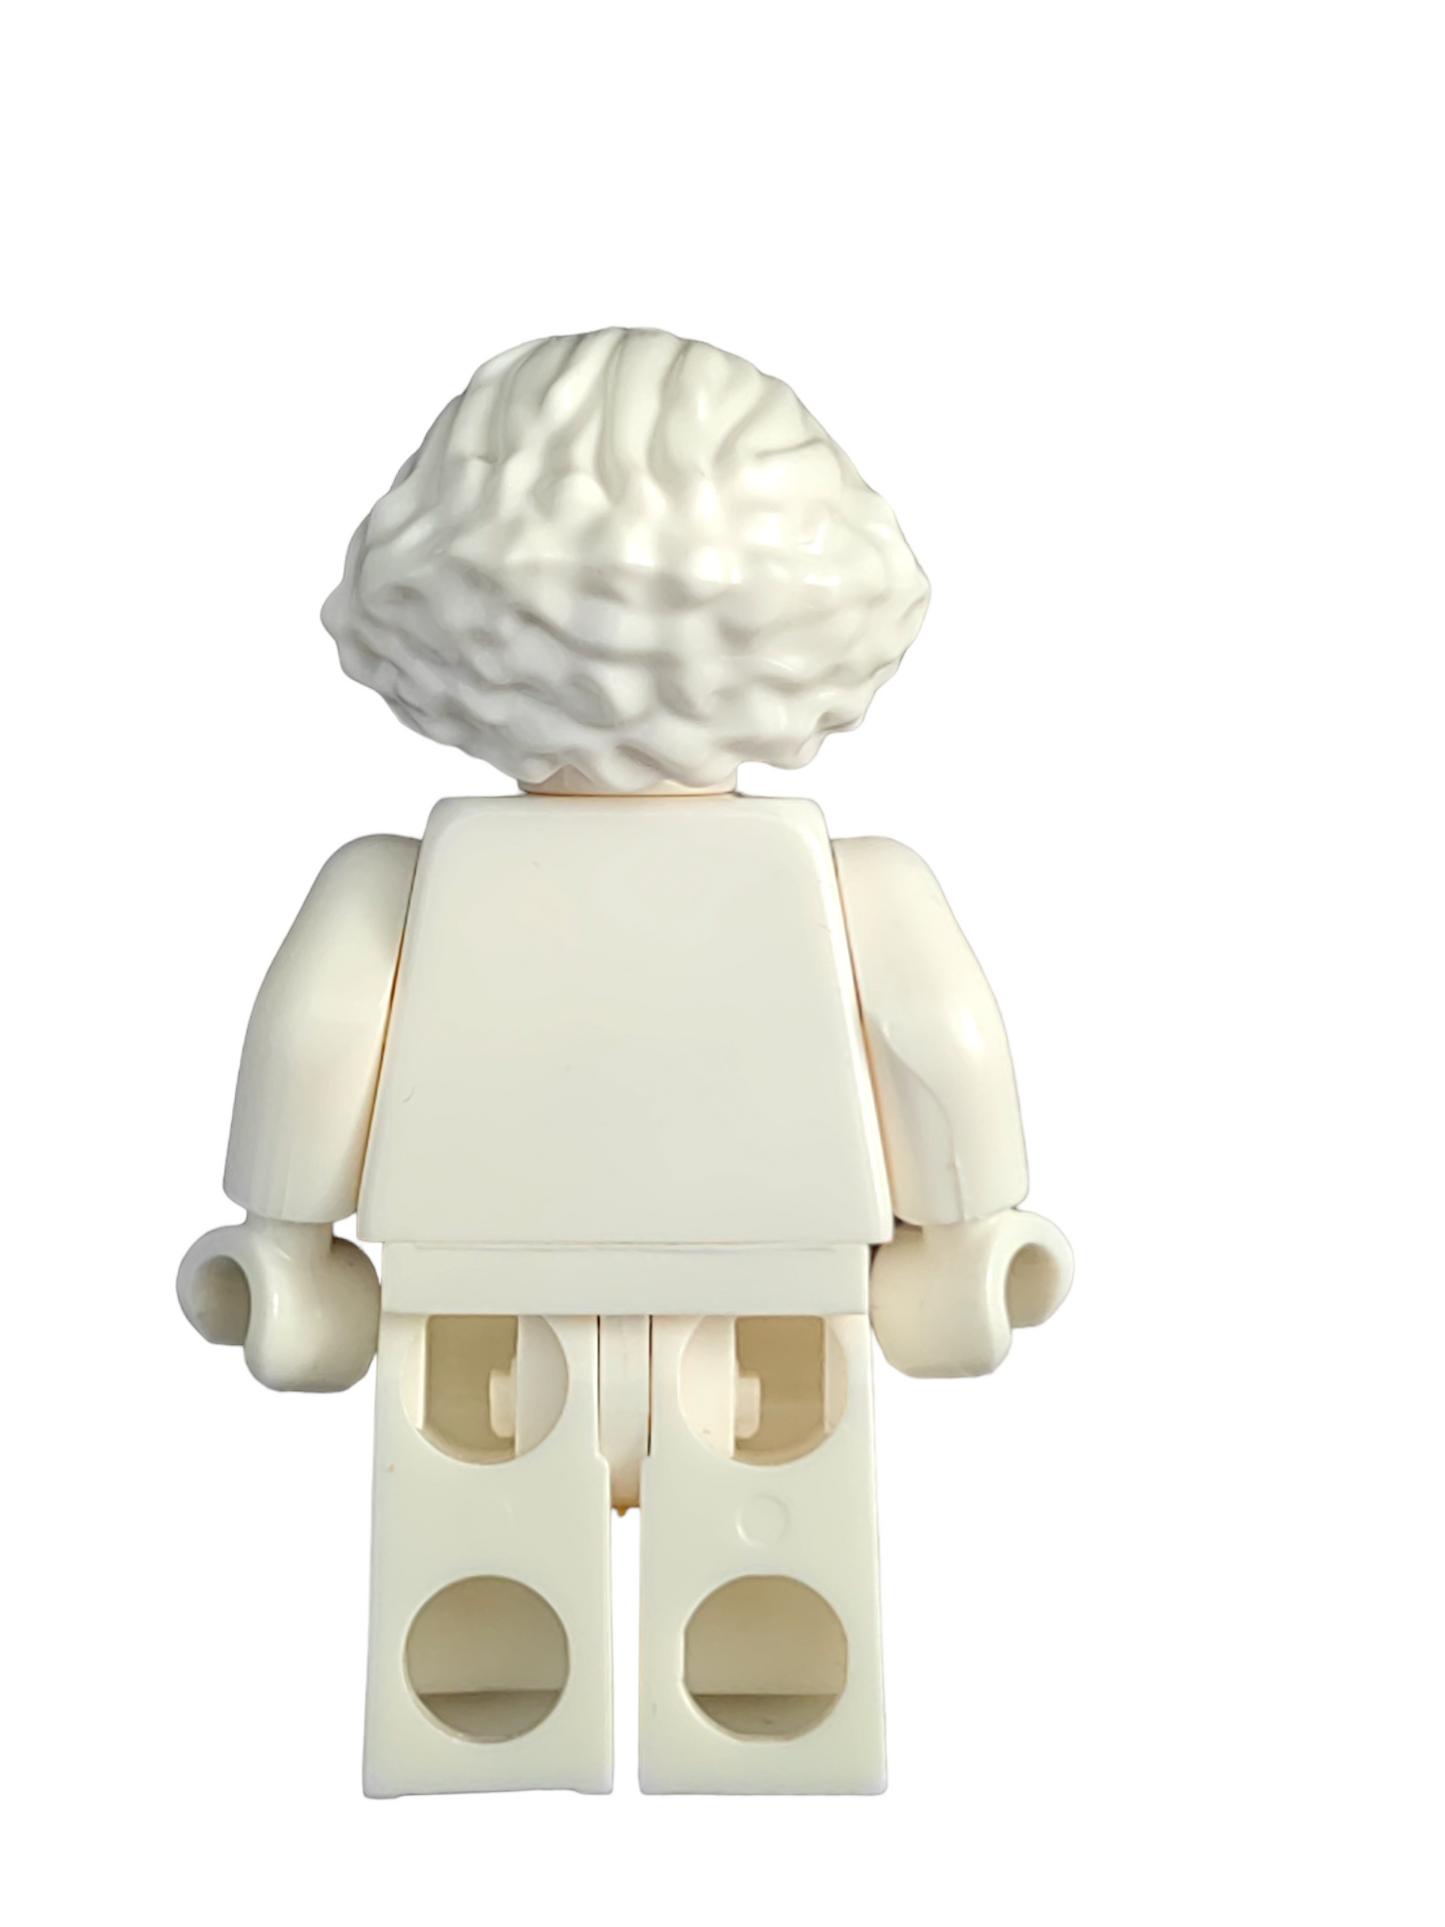 LEGO Wig, White Hair Swept Back with a Peak, and Bushy at the Back - UB1346